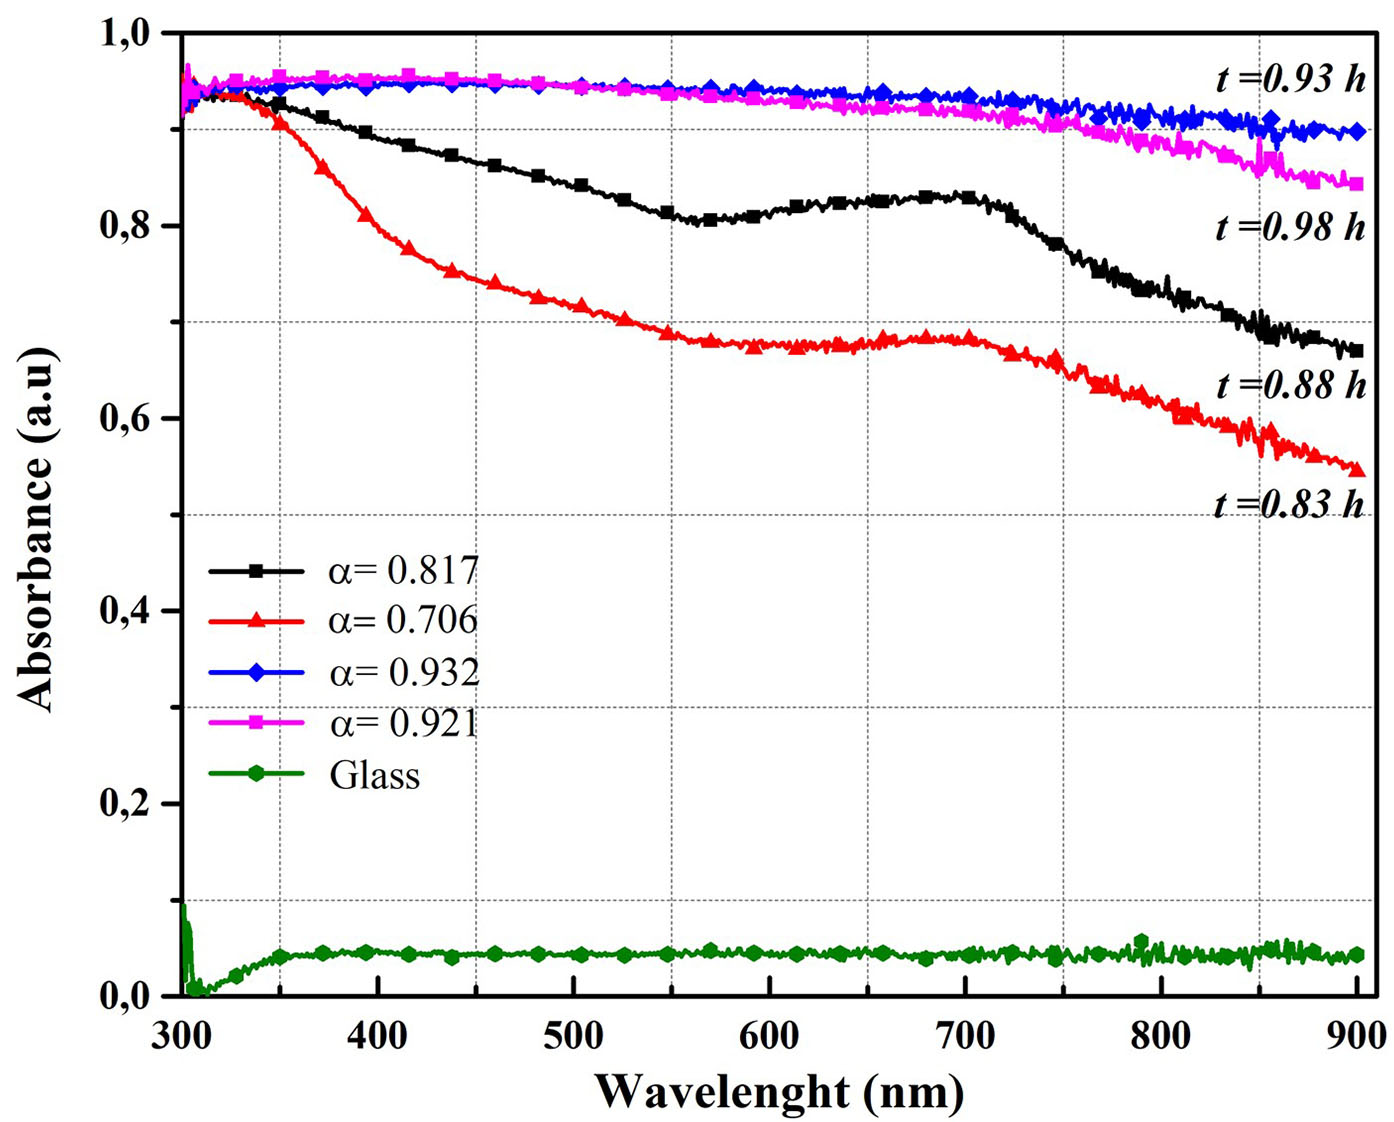 Absorbance spectra vs. wavelength curve for each sample in Table 1 (deposited with immersion velocity 1.5 cm/s)